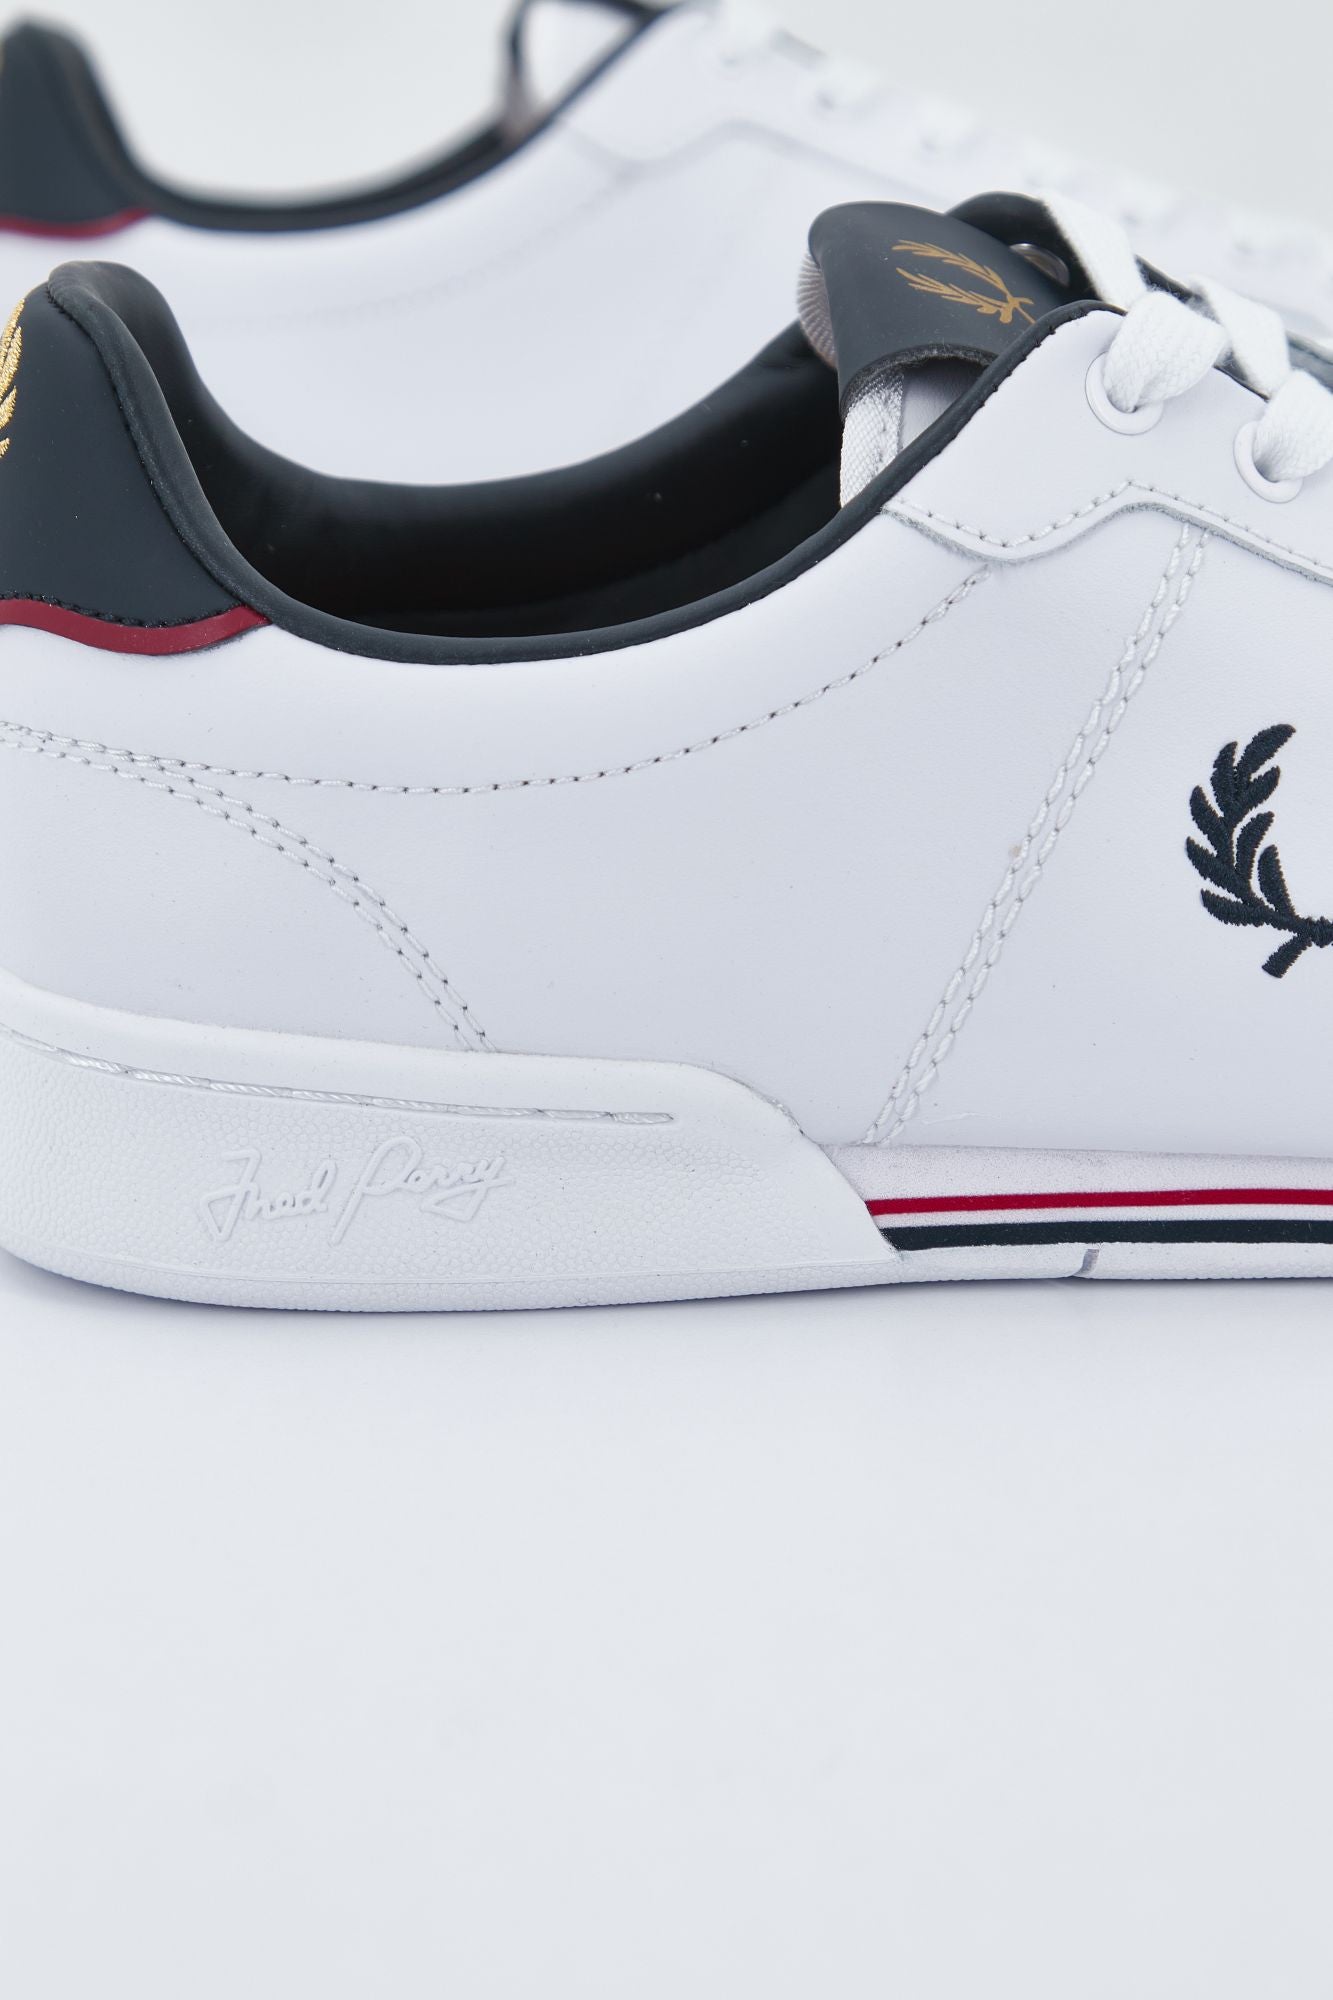 FRED PERRY B722 LEATHER en color BLANCO (4)